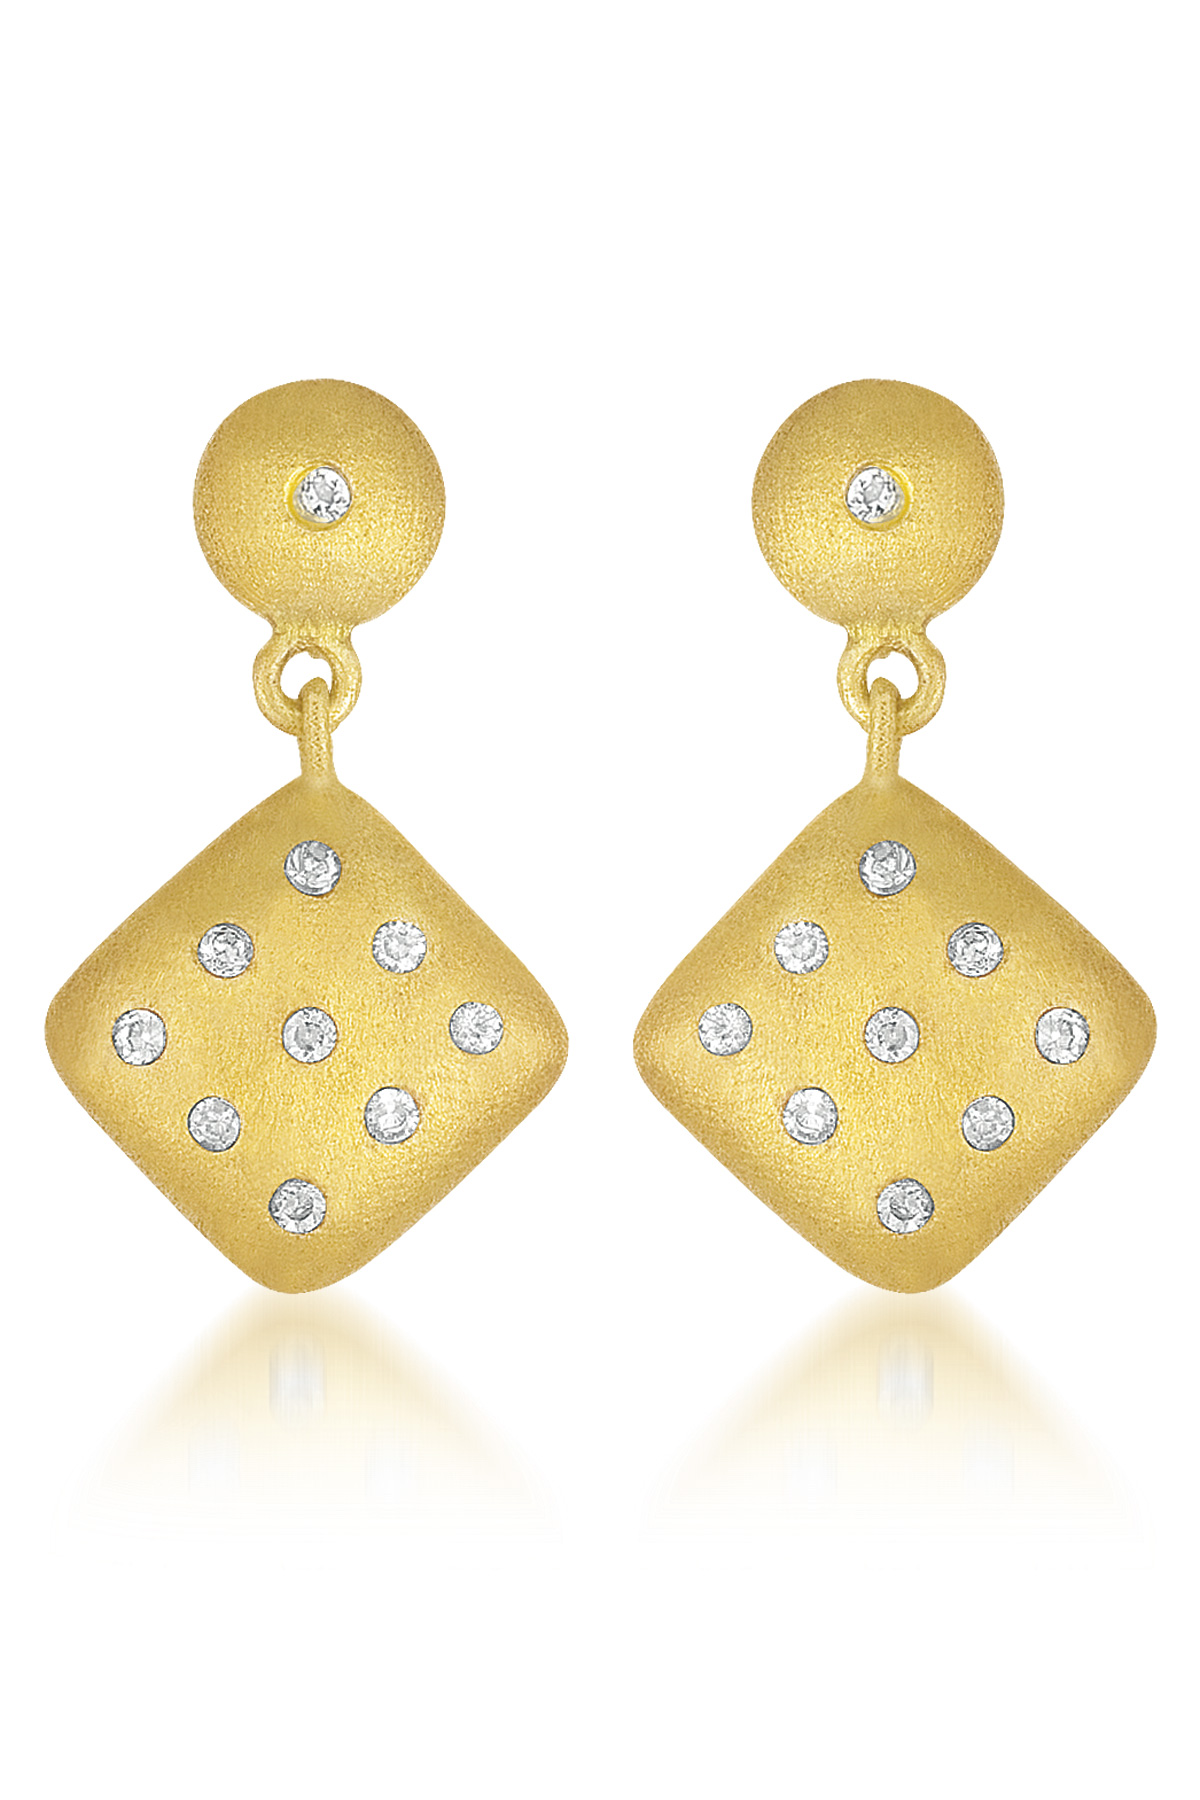 Cubic Zirconia (.925) Sterling Silver Sterling Silver Gold Plated Square Shape Drop Earrings